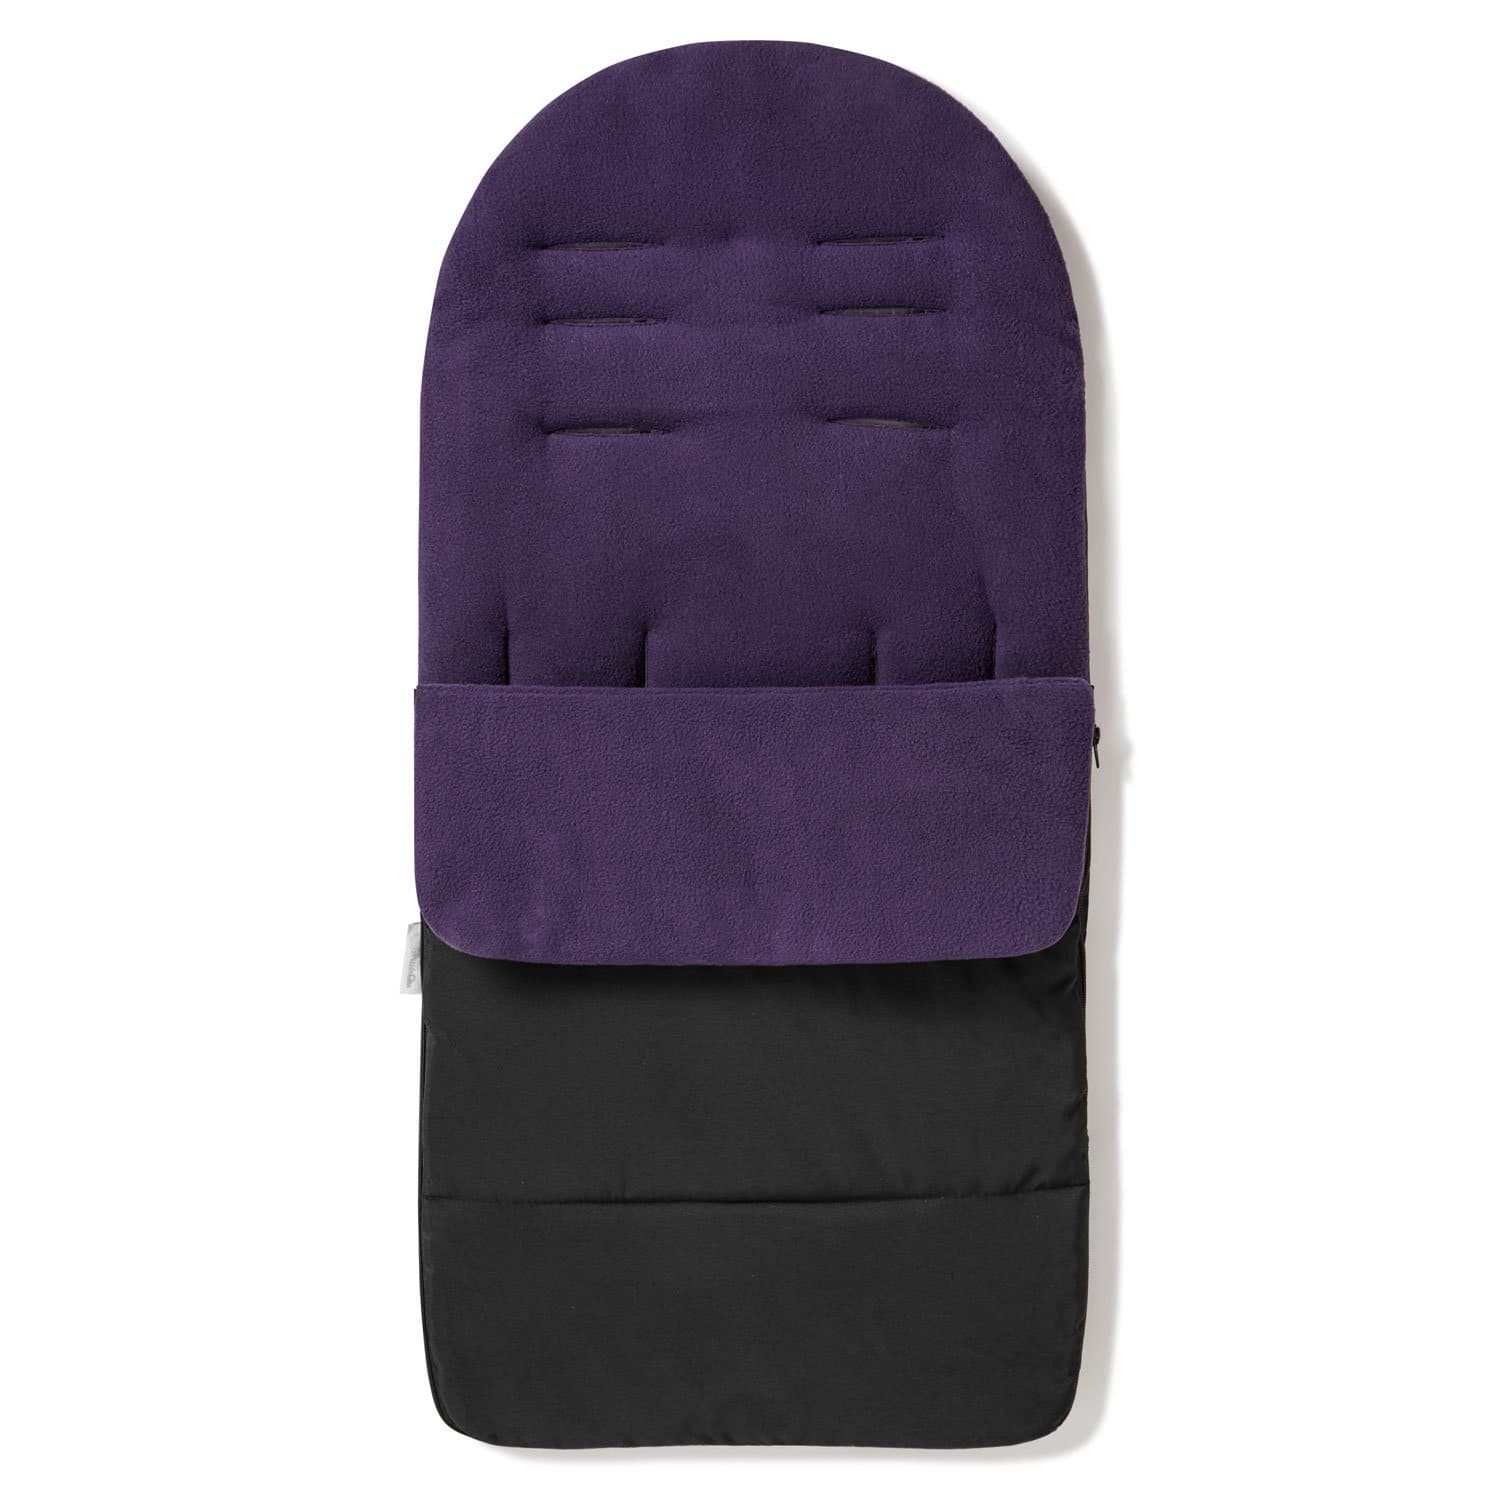 Premium Footmuff / Cosy Toes Compatible with Orbit Baby - Plum Purple / Fits All Models | For Your Little One